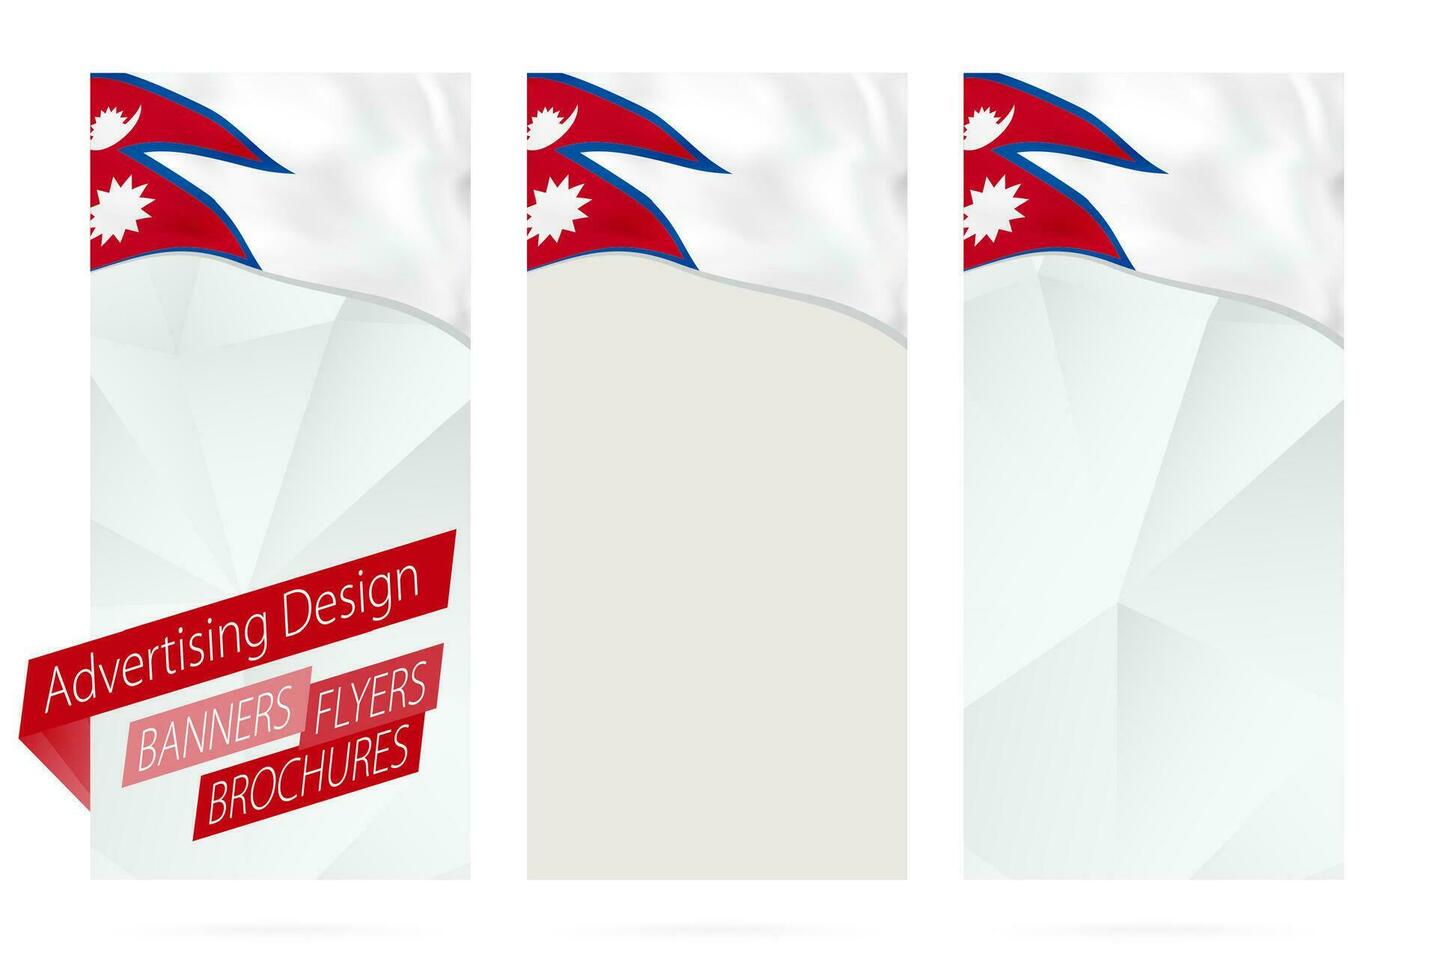 Design of banners, flyers, brochures with flag of Nepal. vector